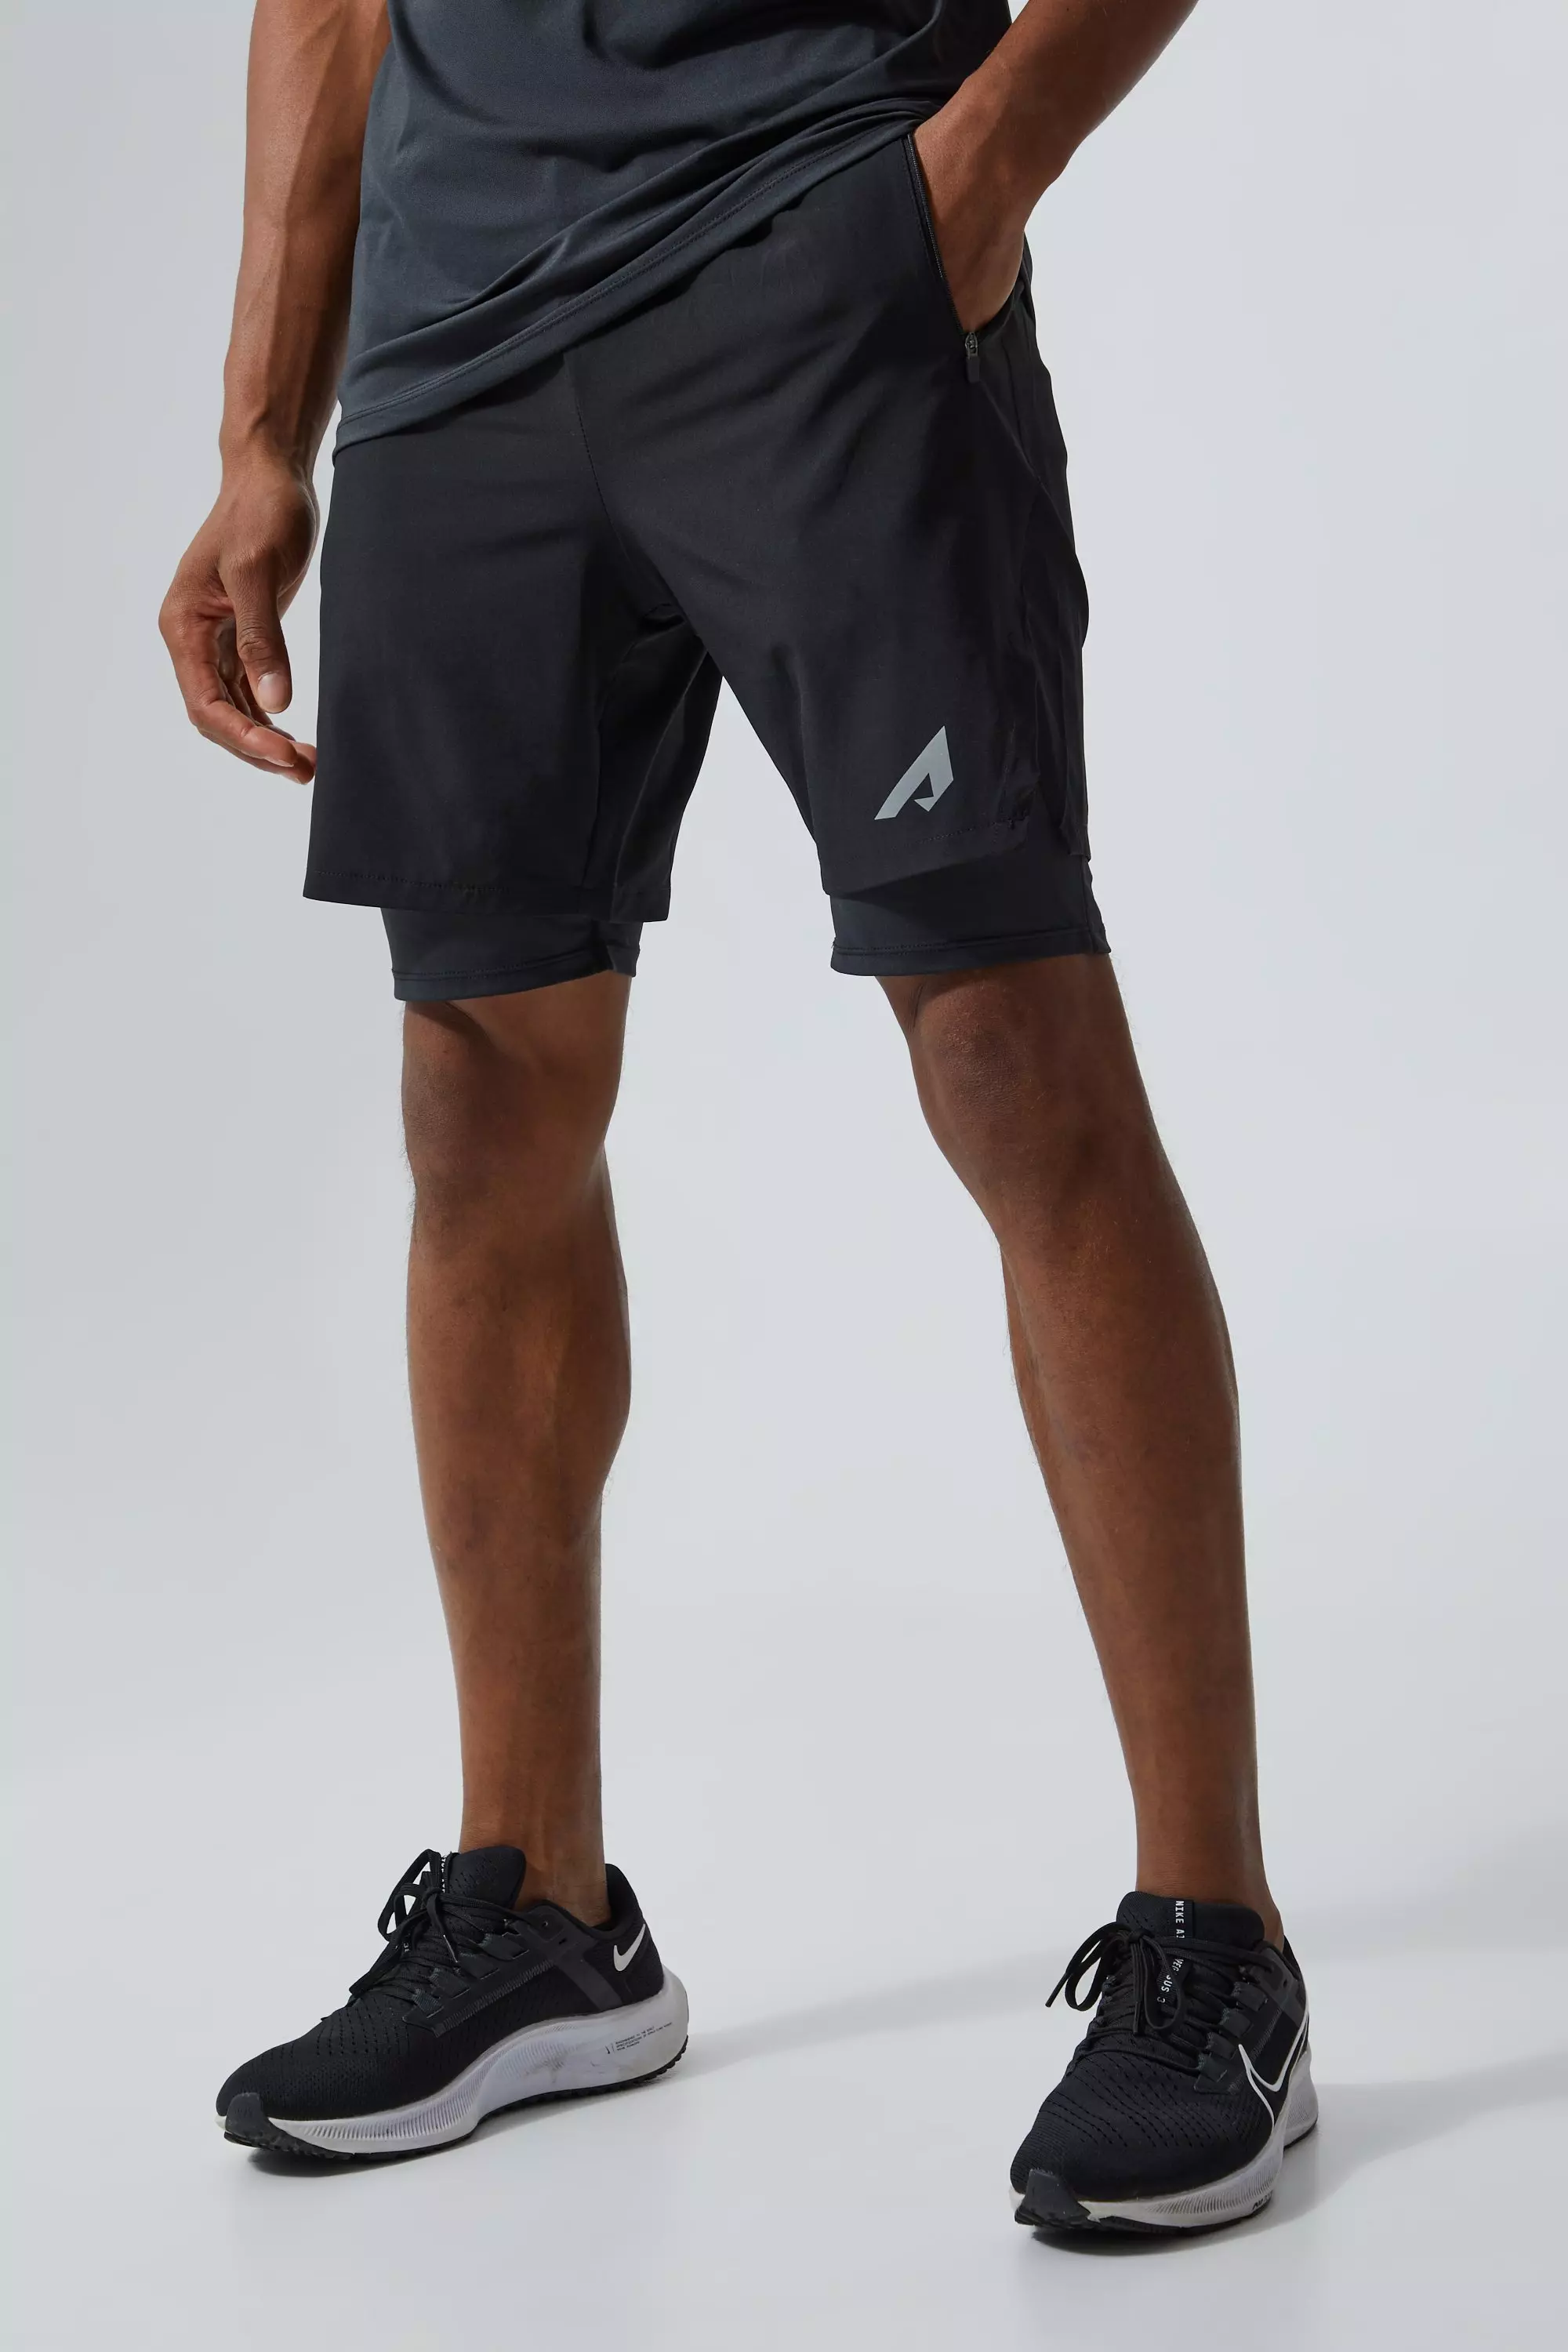 Active 2 In 1 Reflective Shorts Black